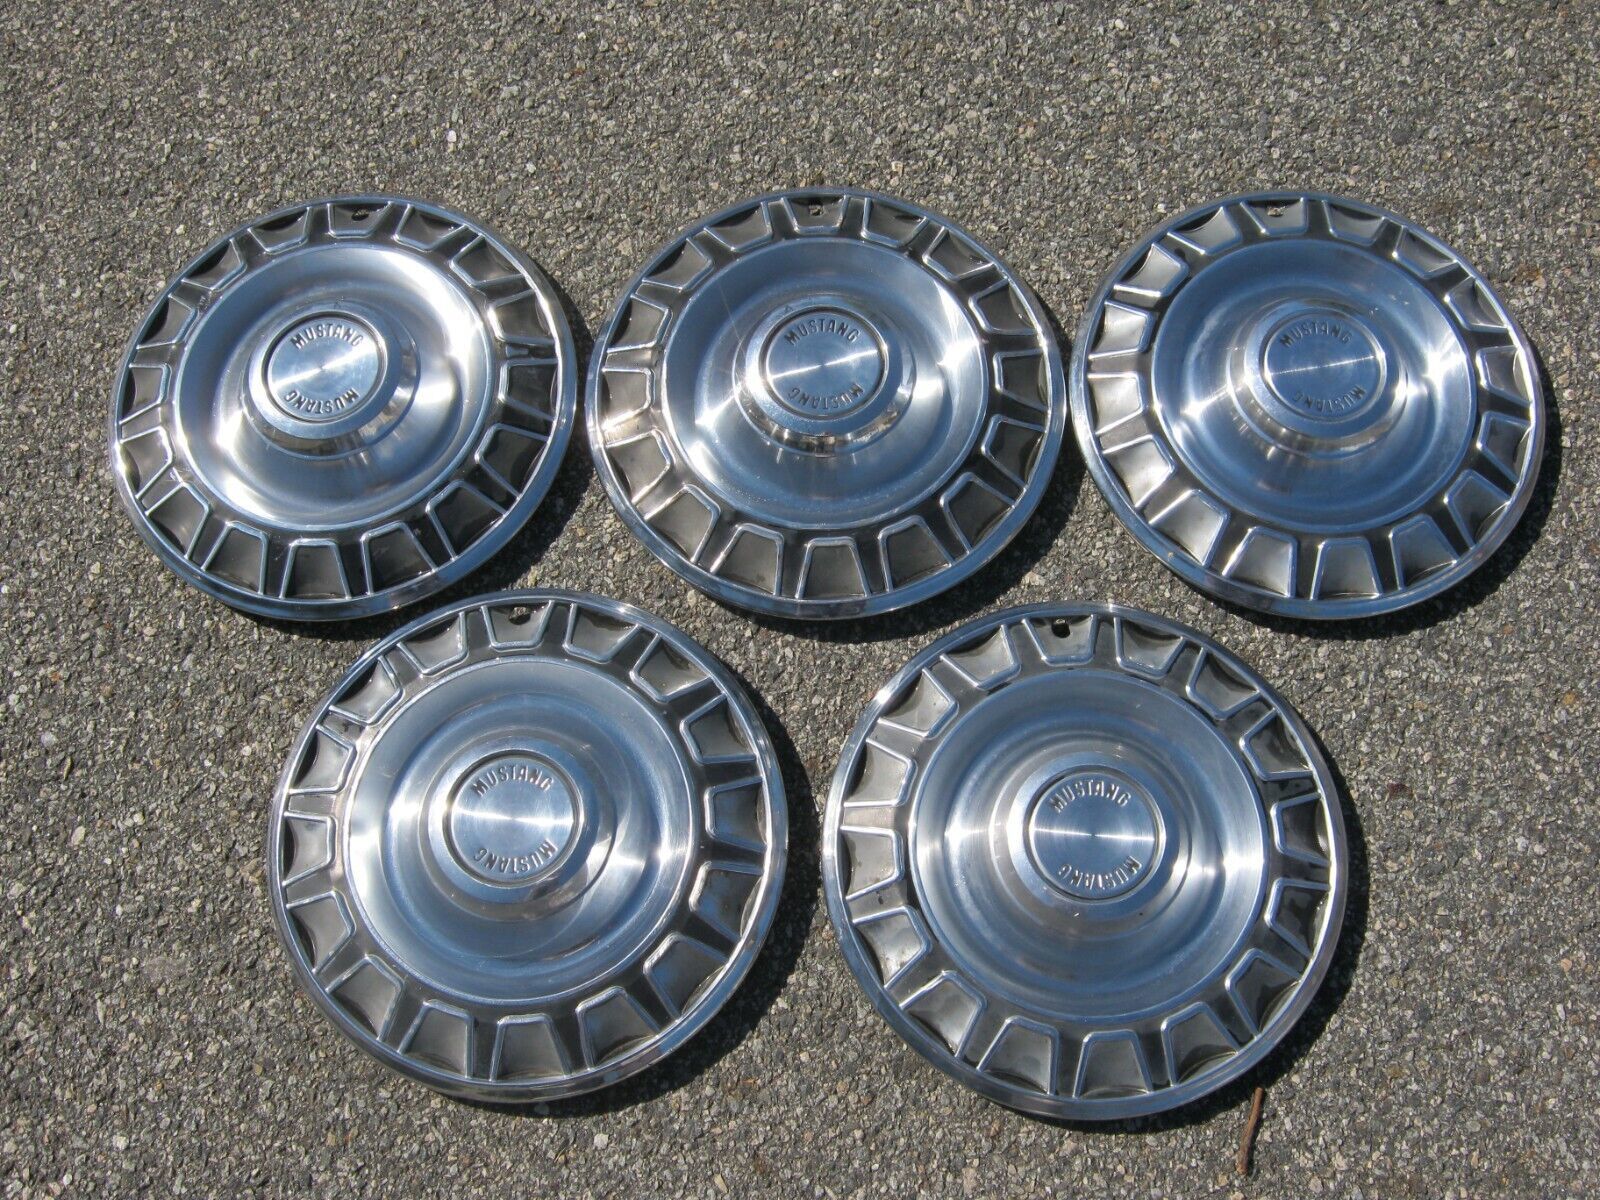 Factory original 1970 Ford Mustang 14 inch hubcaps wheel covers - $83.80